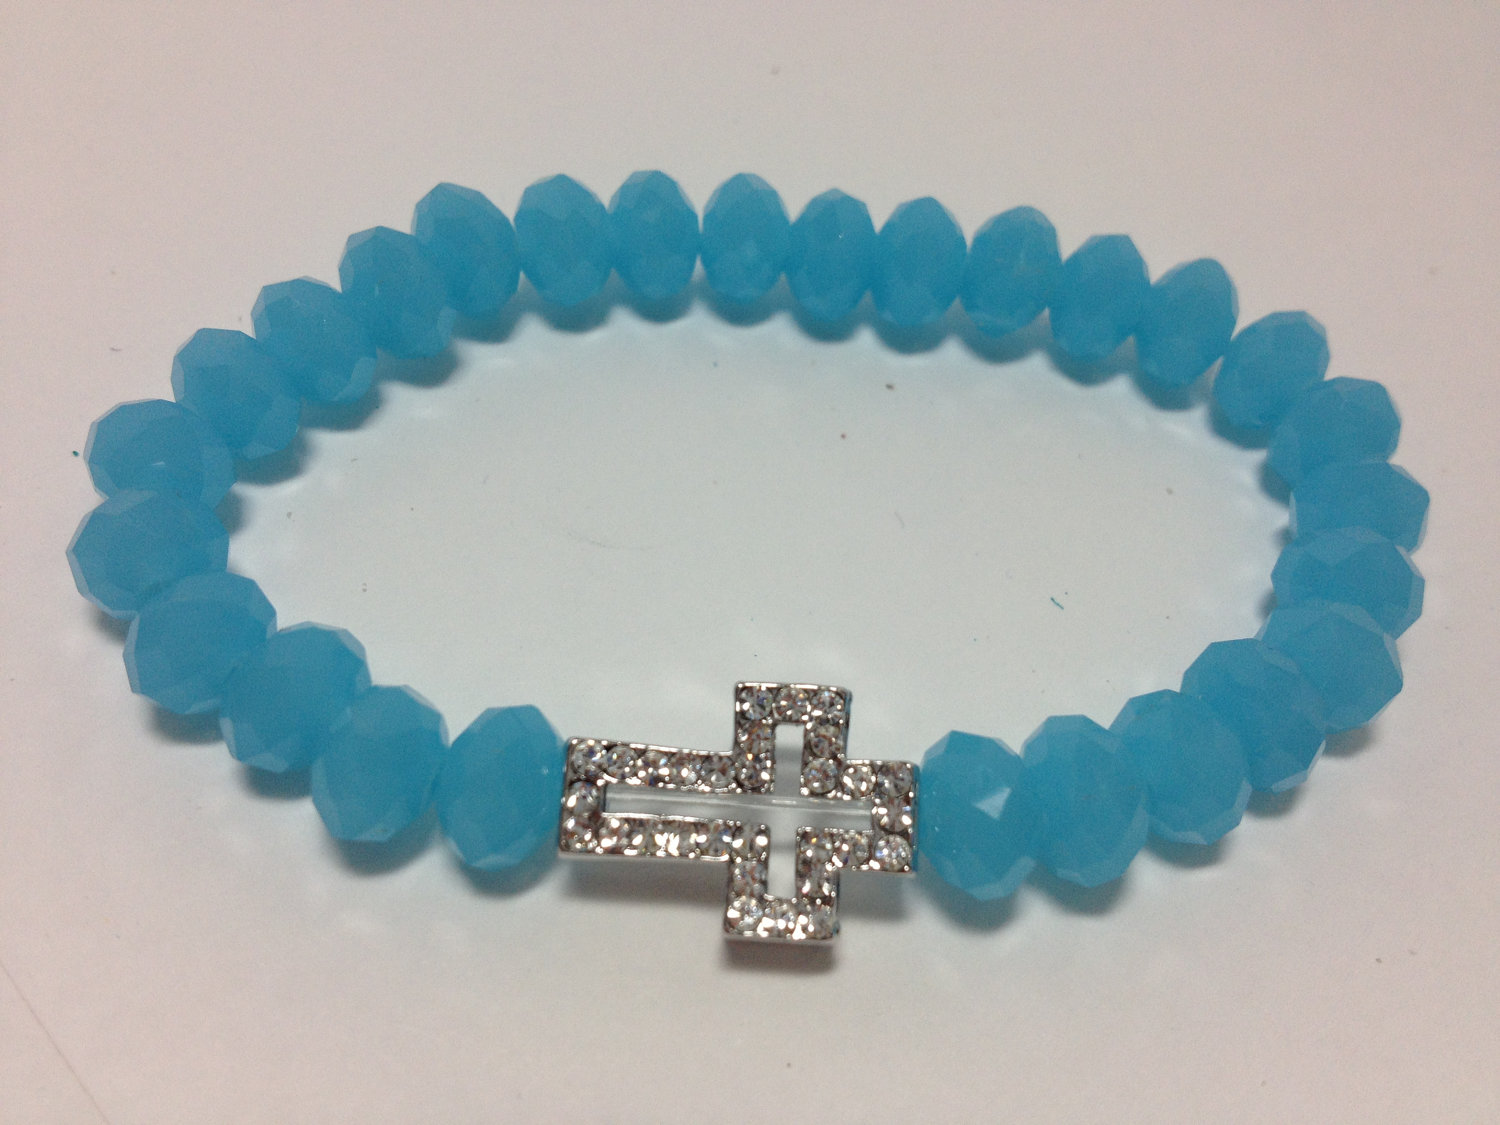 Crystal pave cross with light blue rondelle beads